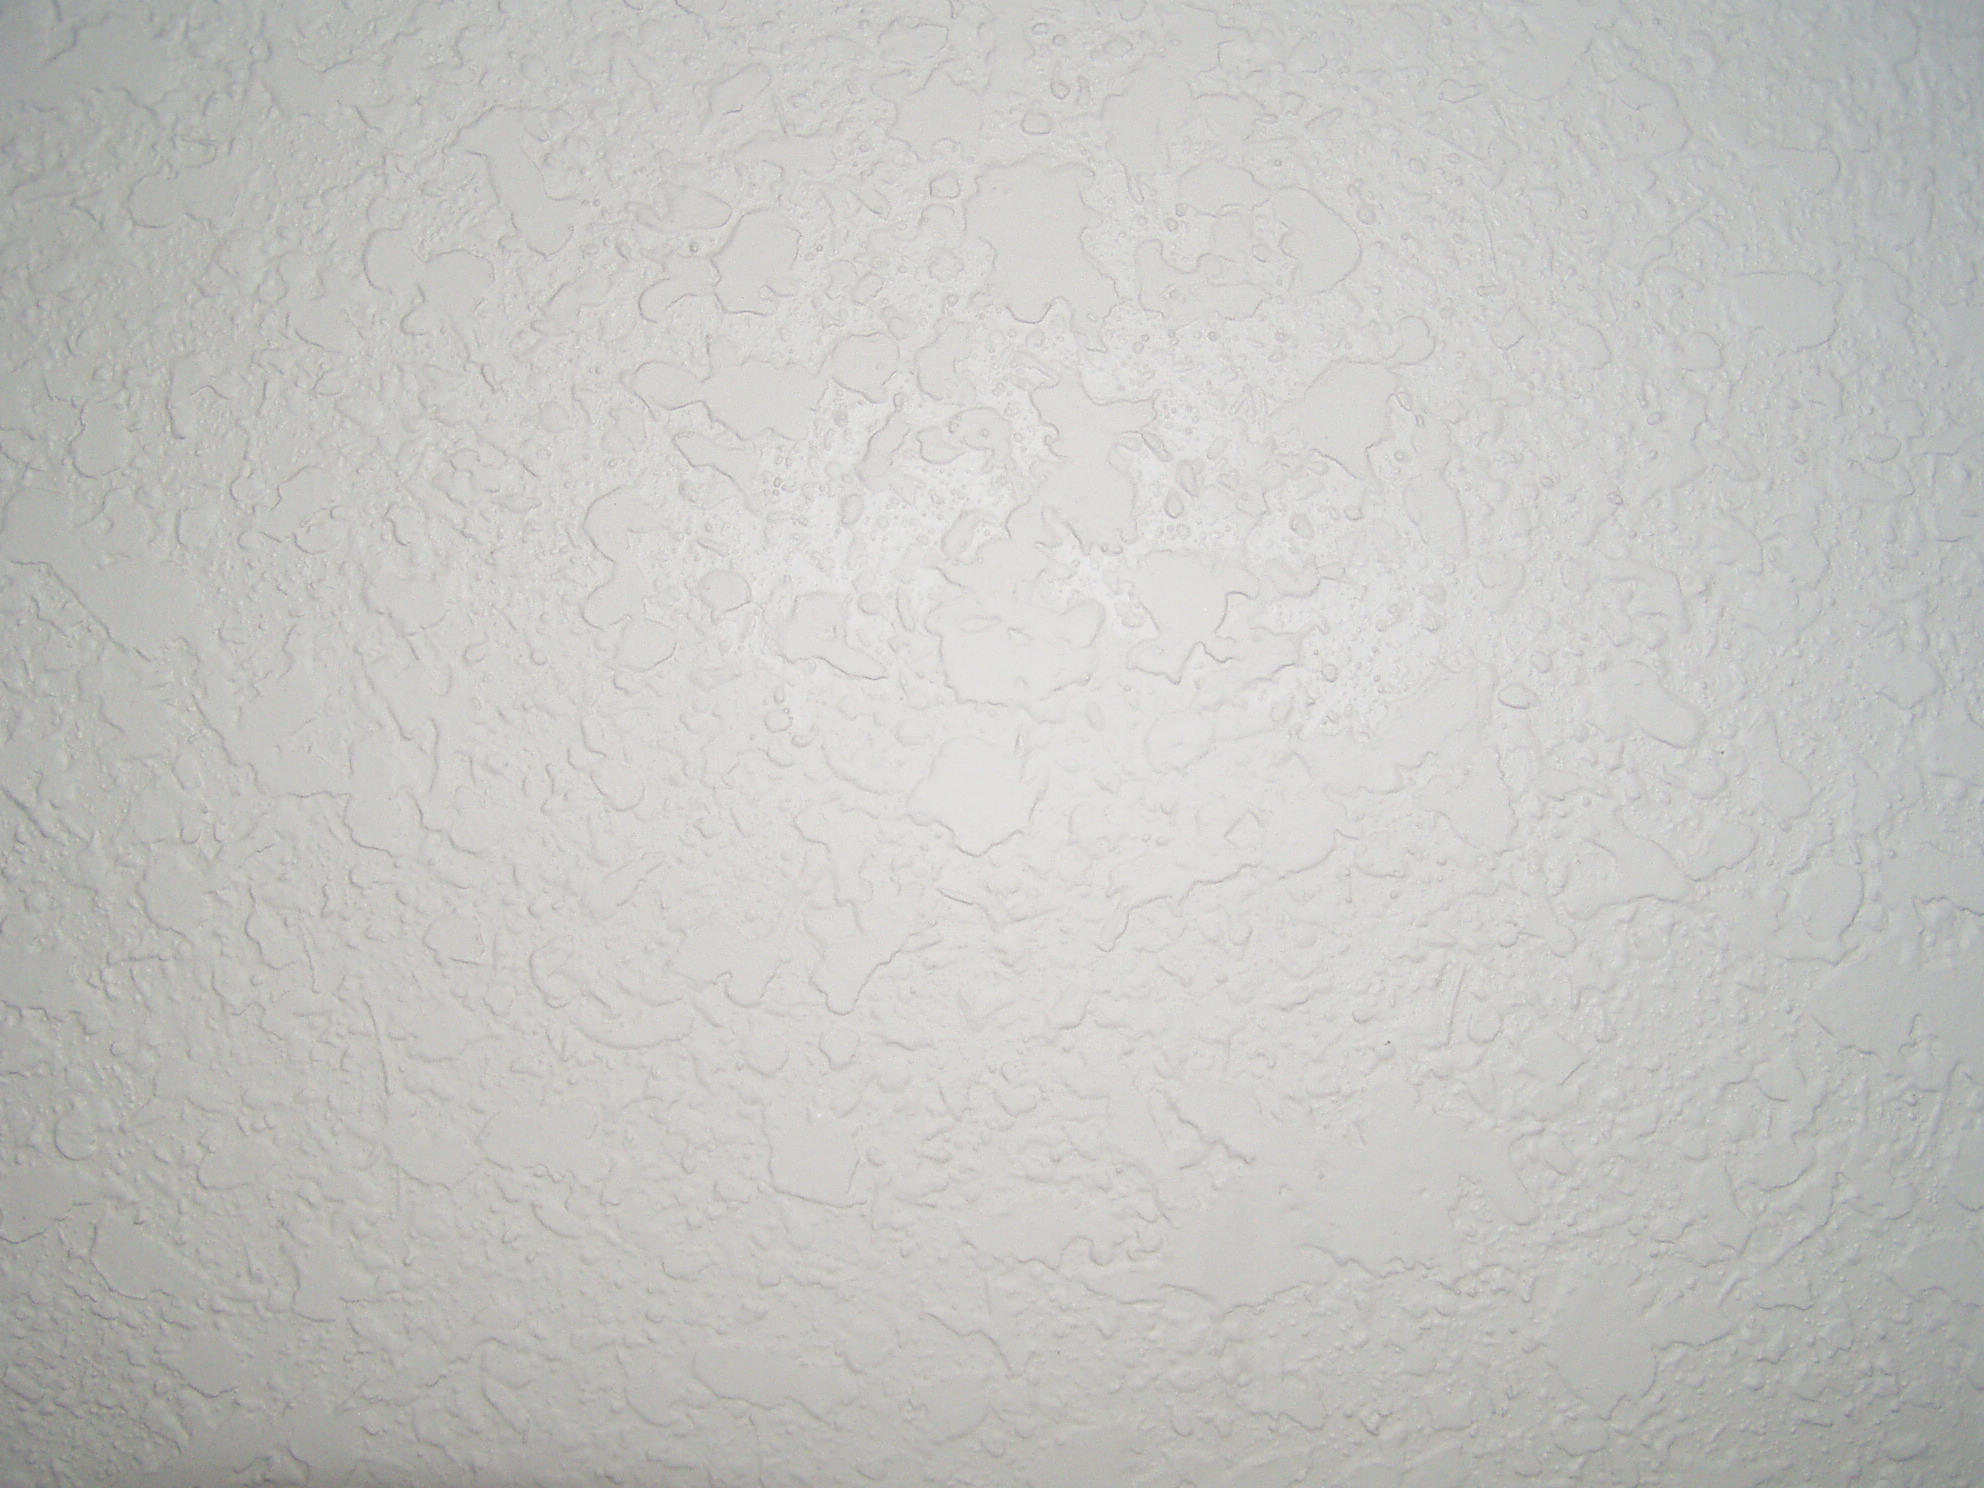 Pro Tech S Drywall Divison Can Handle Everything From Small Patches To